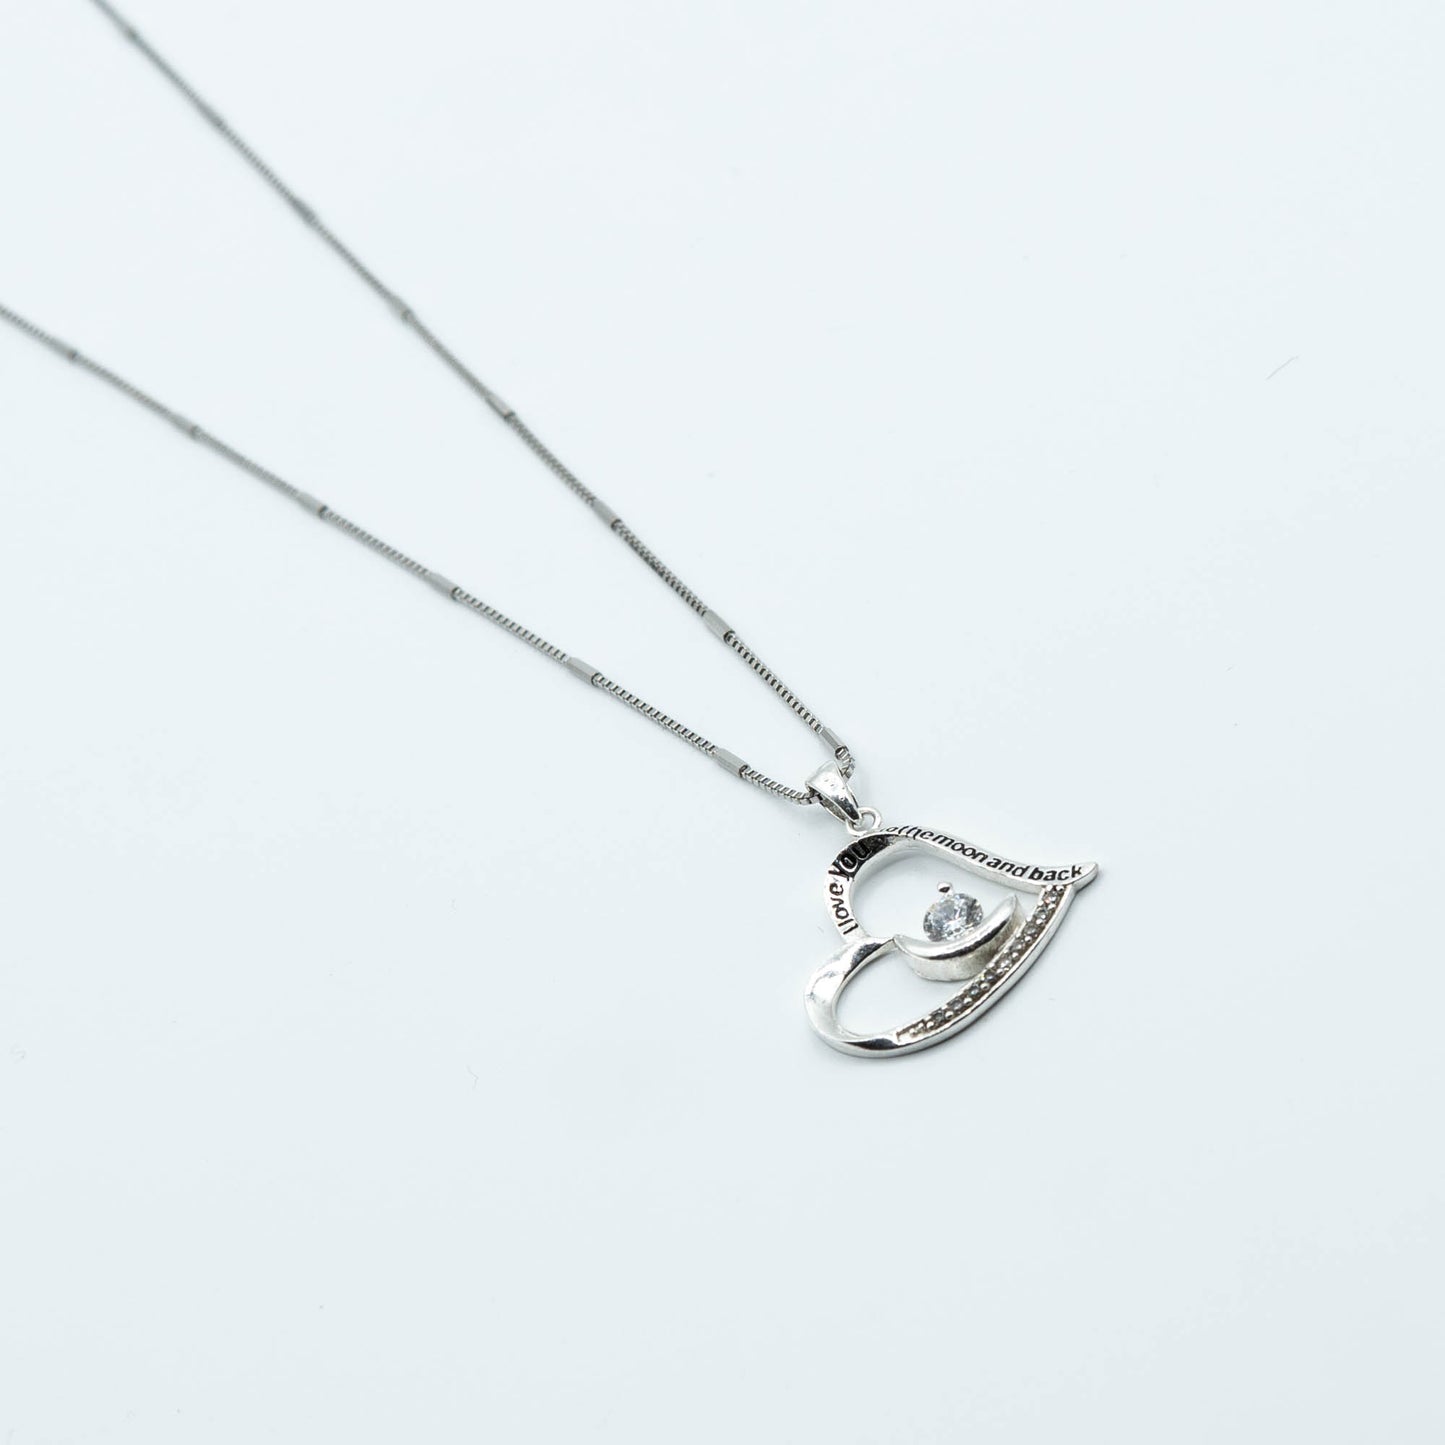 DK-925-461 heart necklace  "I love you to the moon and back"